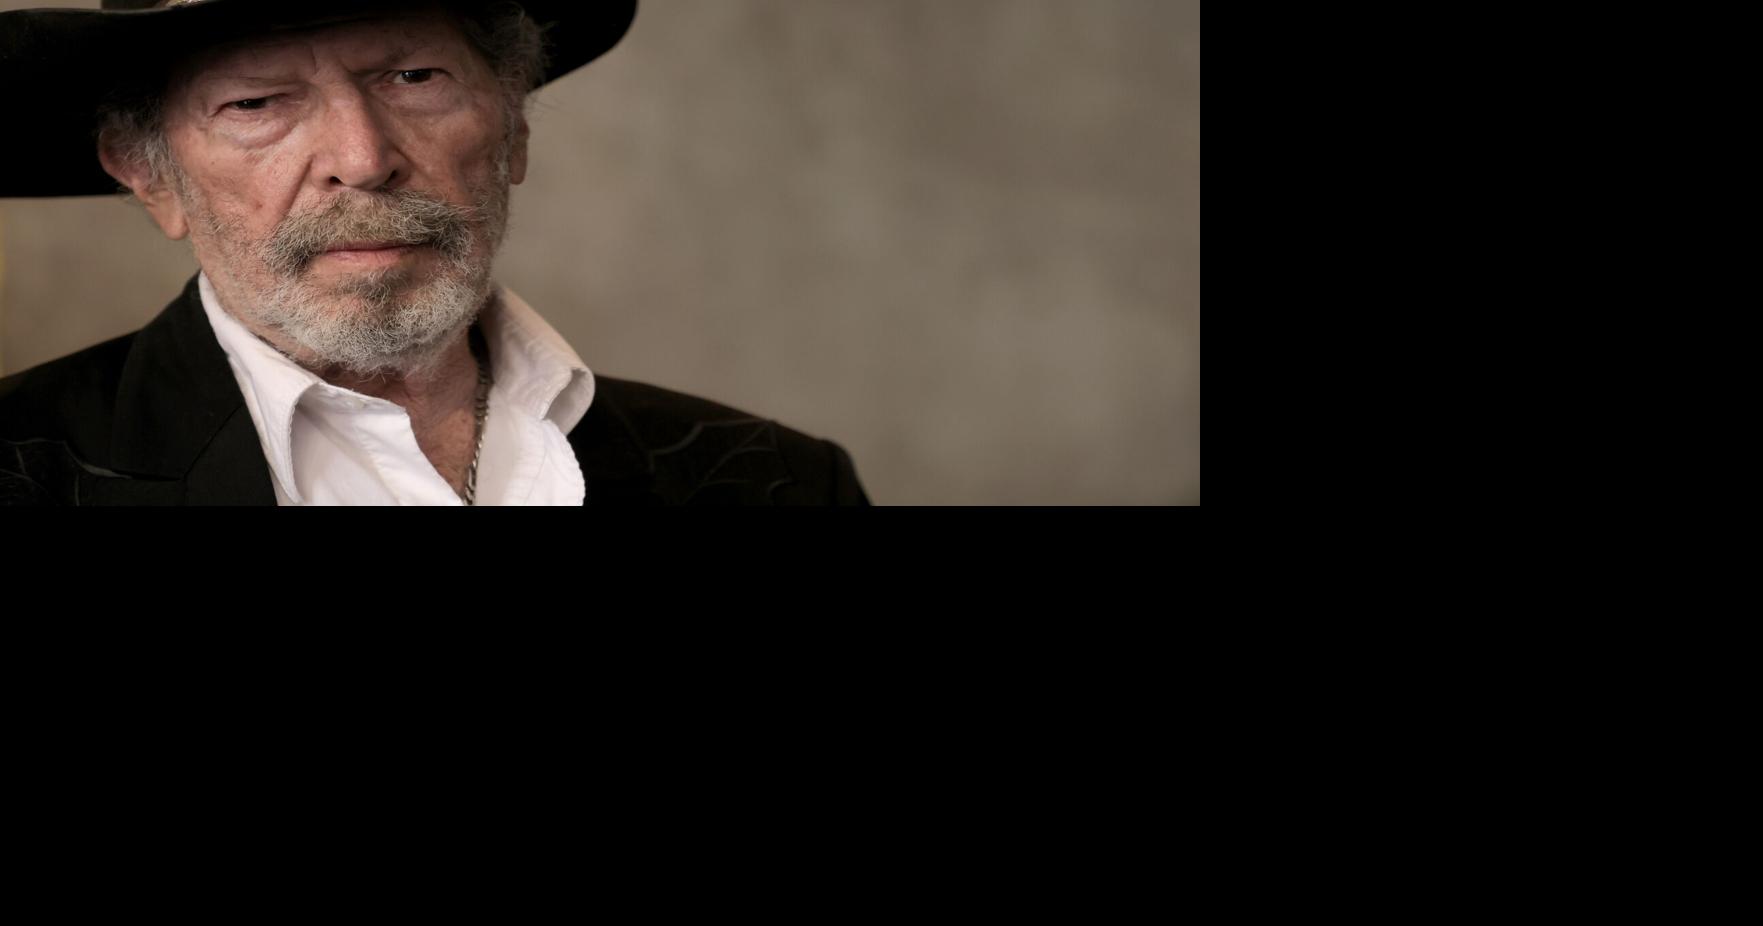 Kinky Friedman, Texas singer, satirist and former political candidate, dies at 79 | News